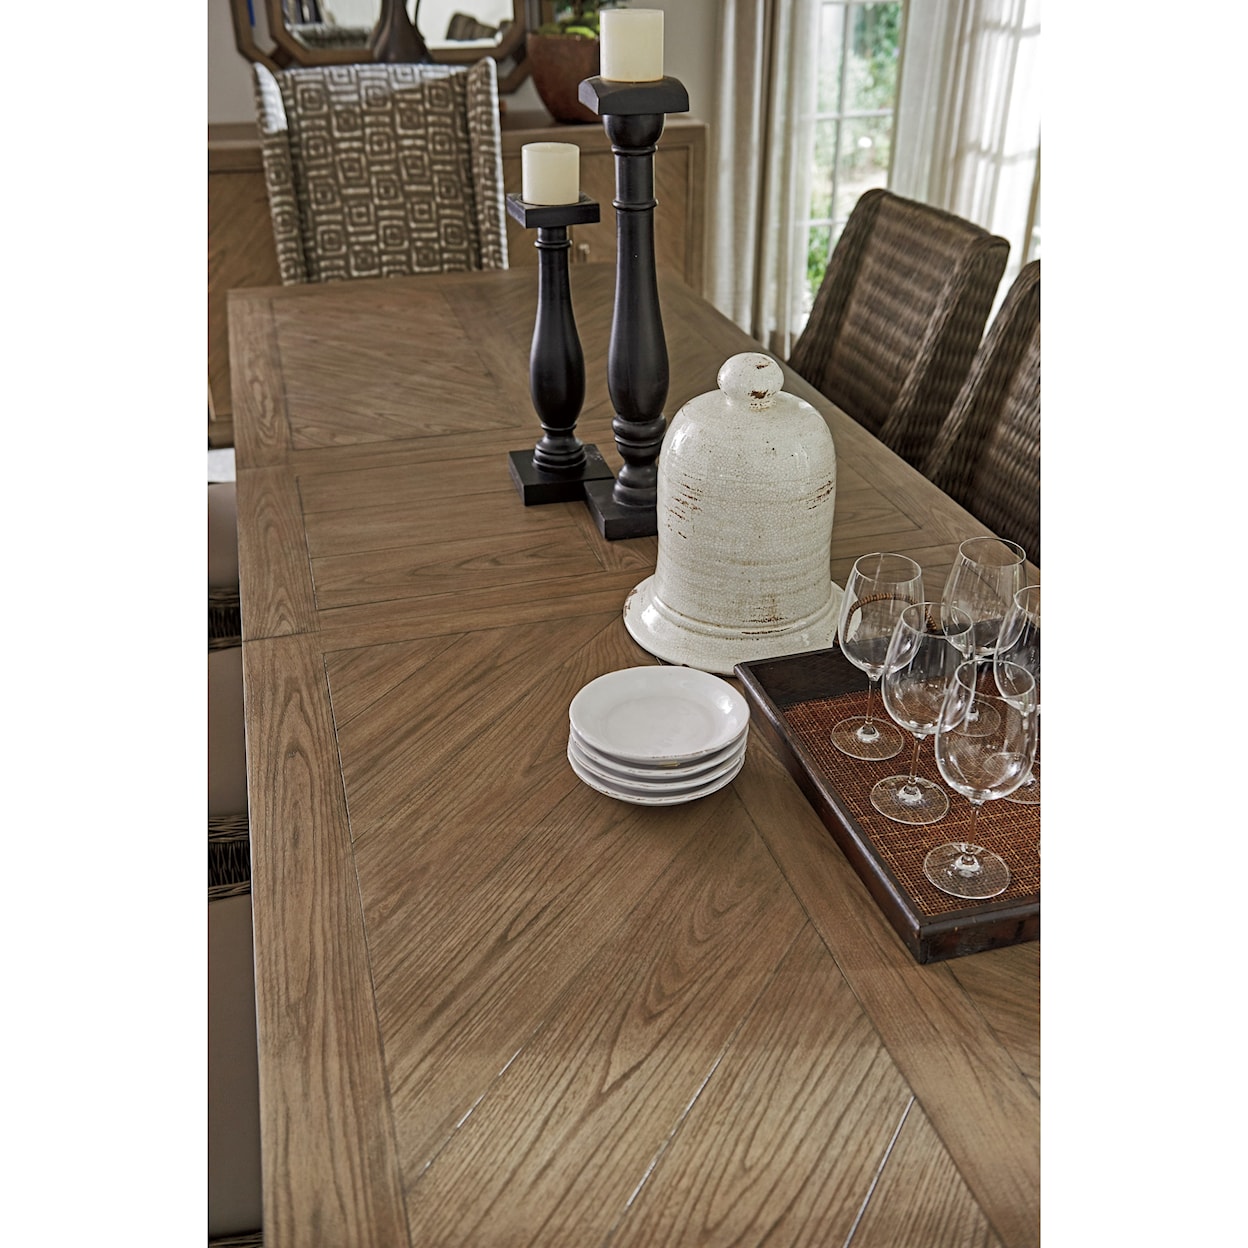 Tommy Bahama Home Cypress Point 7 Pc Dining Set